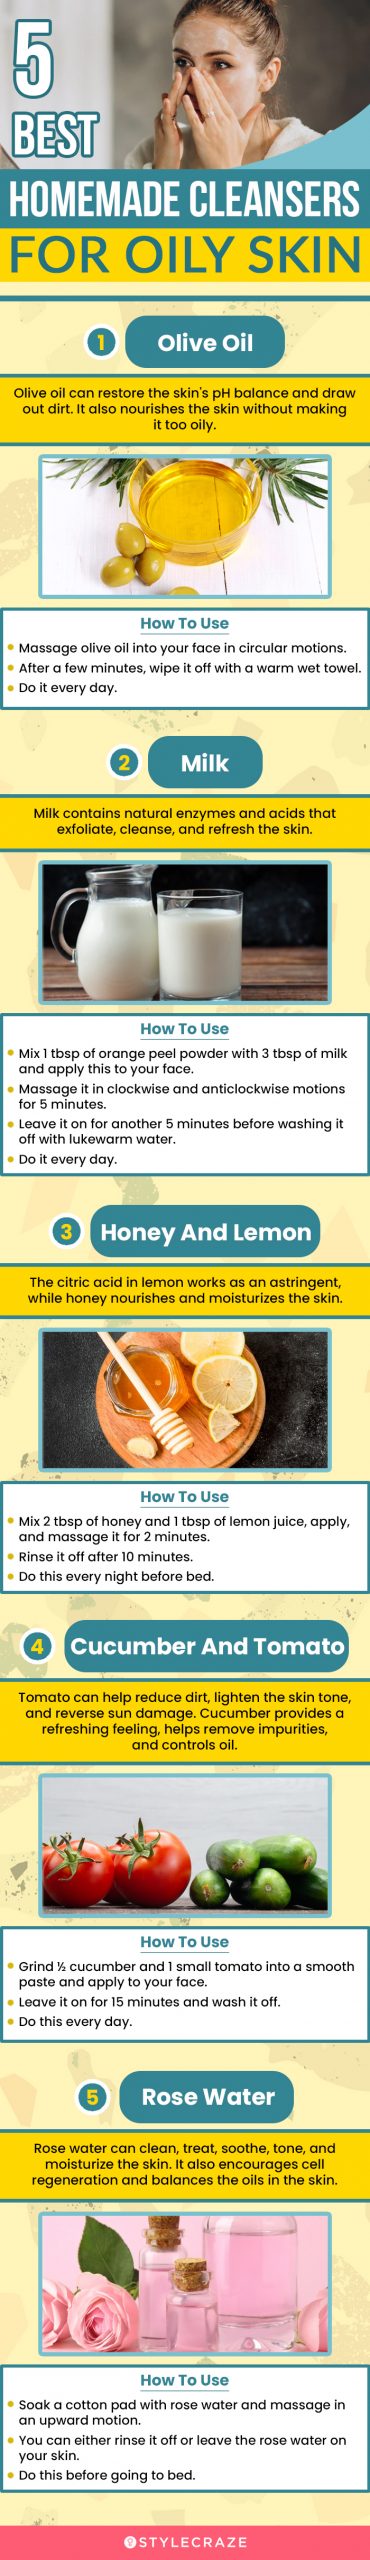 5 best homemade cleansers for oily skin(infographic)